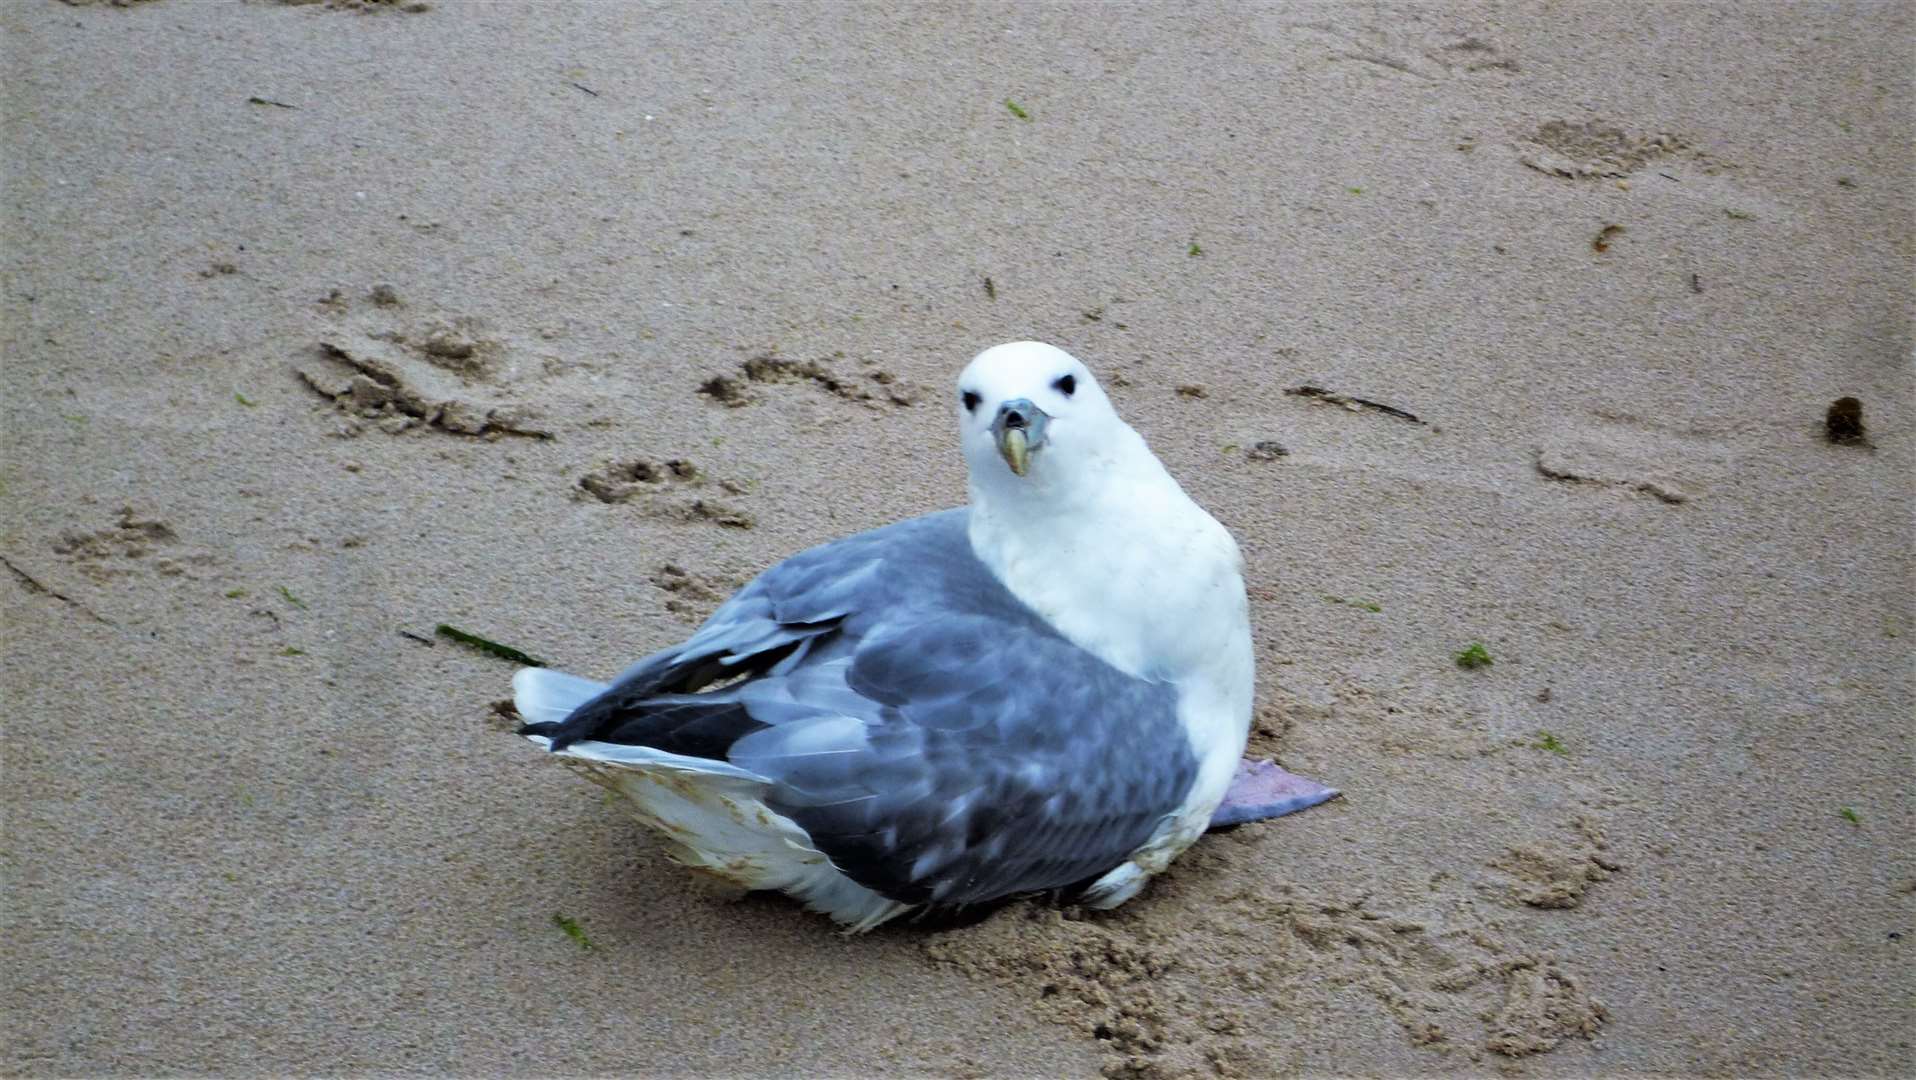 A fulmar was also seen in distress on the beach. Picture: DGS